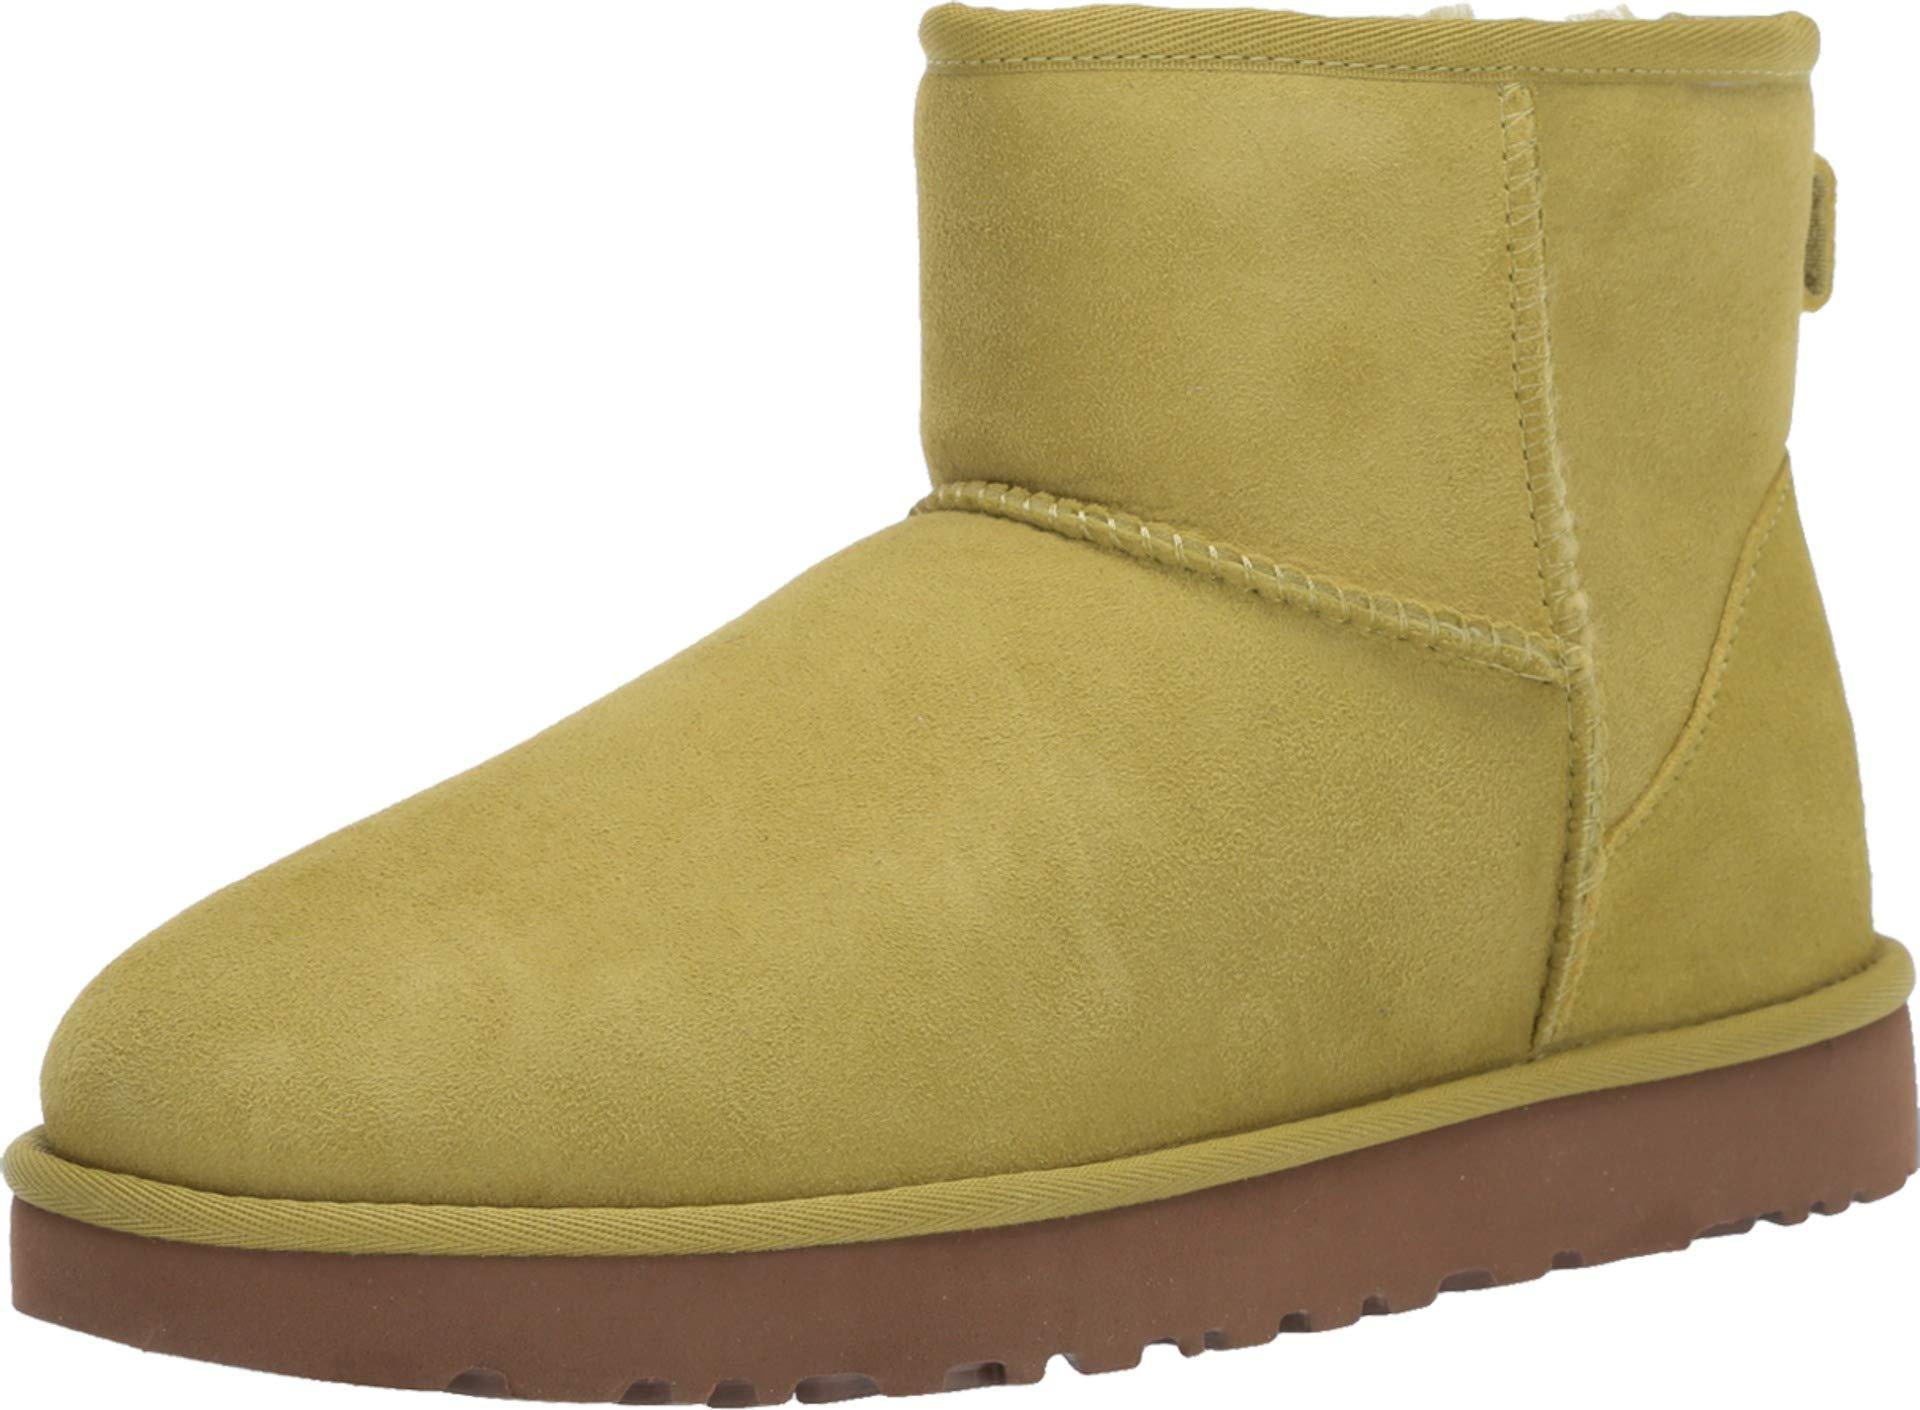 lime green ugg boots